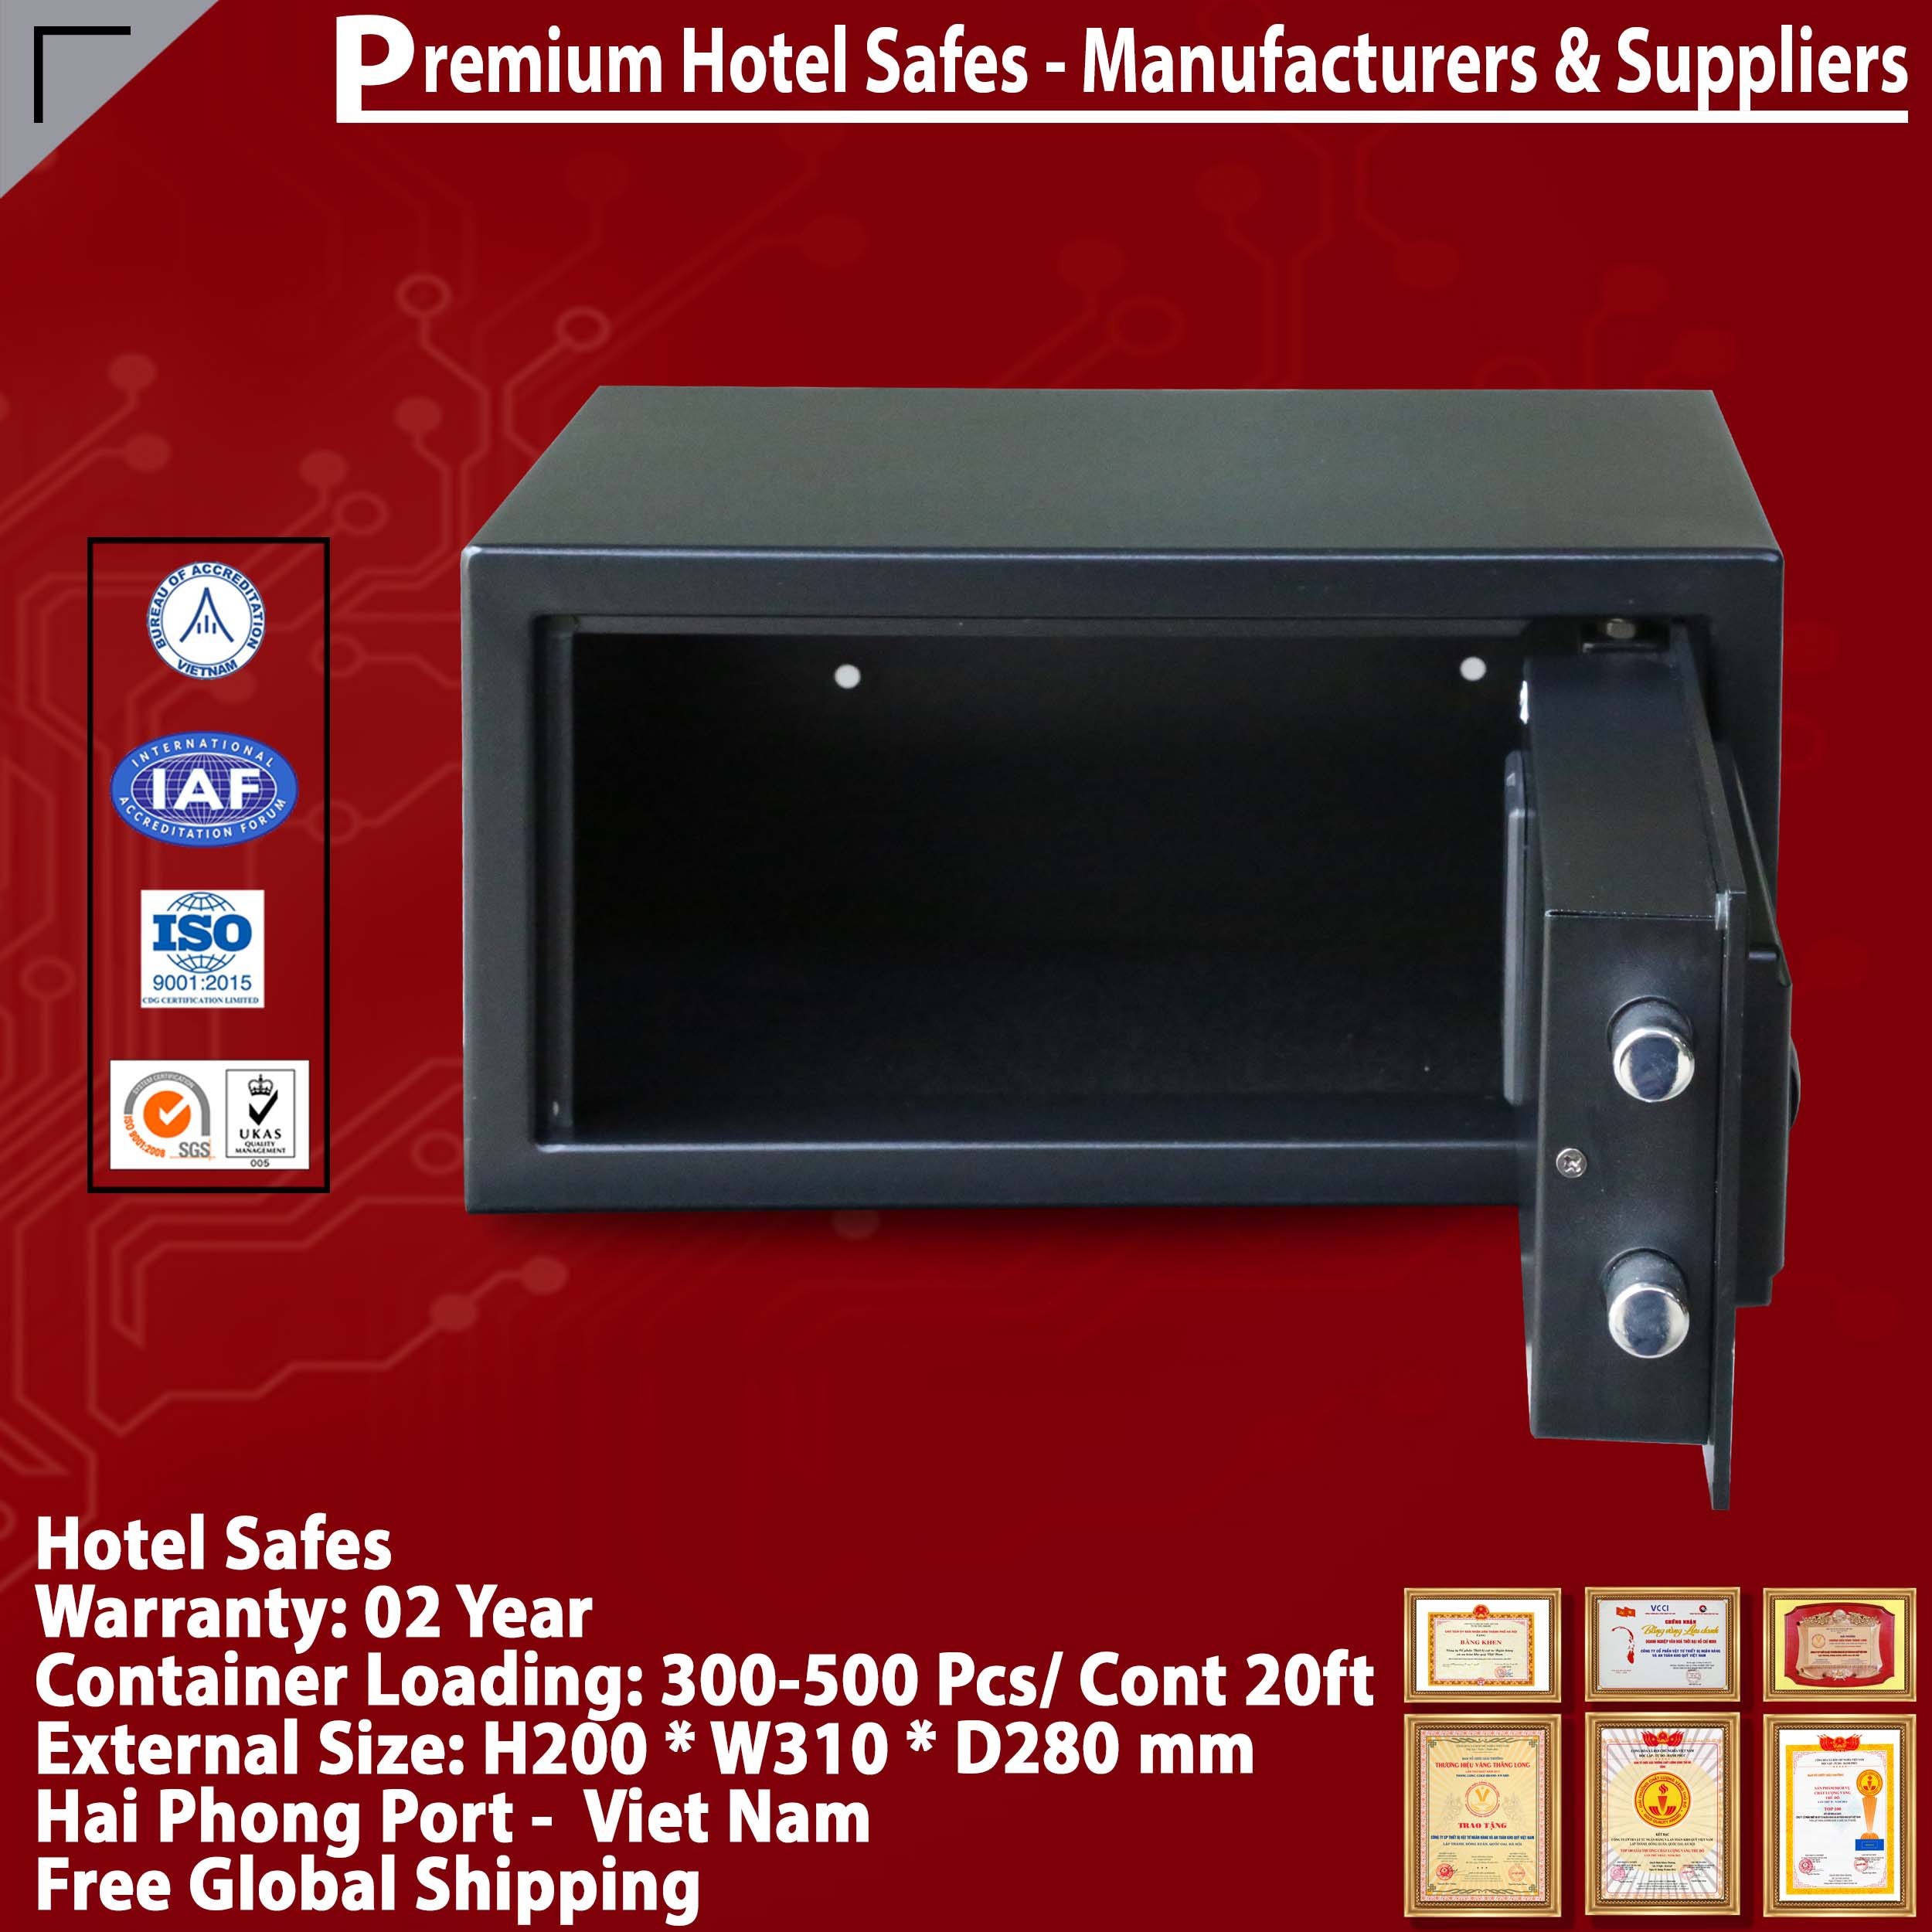 Best Sellers In Hotel Safes Made In Viet Nam Brands